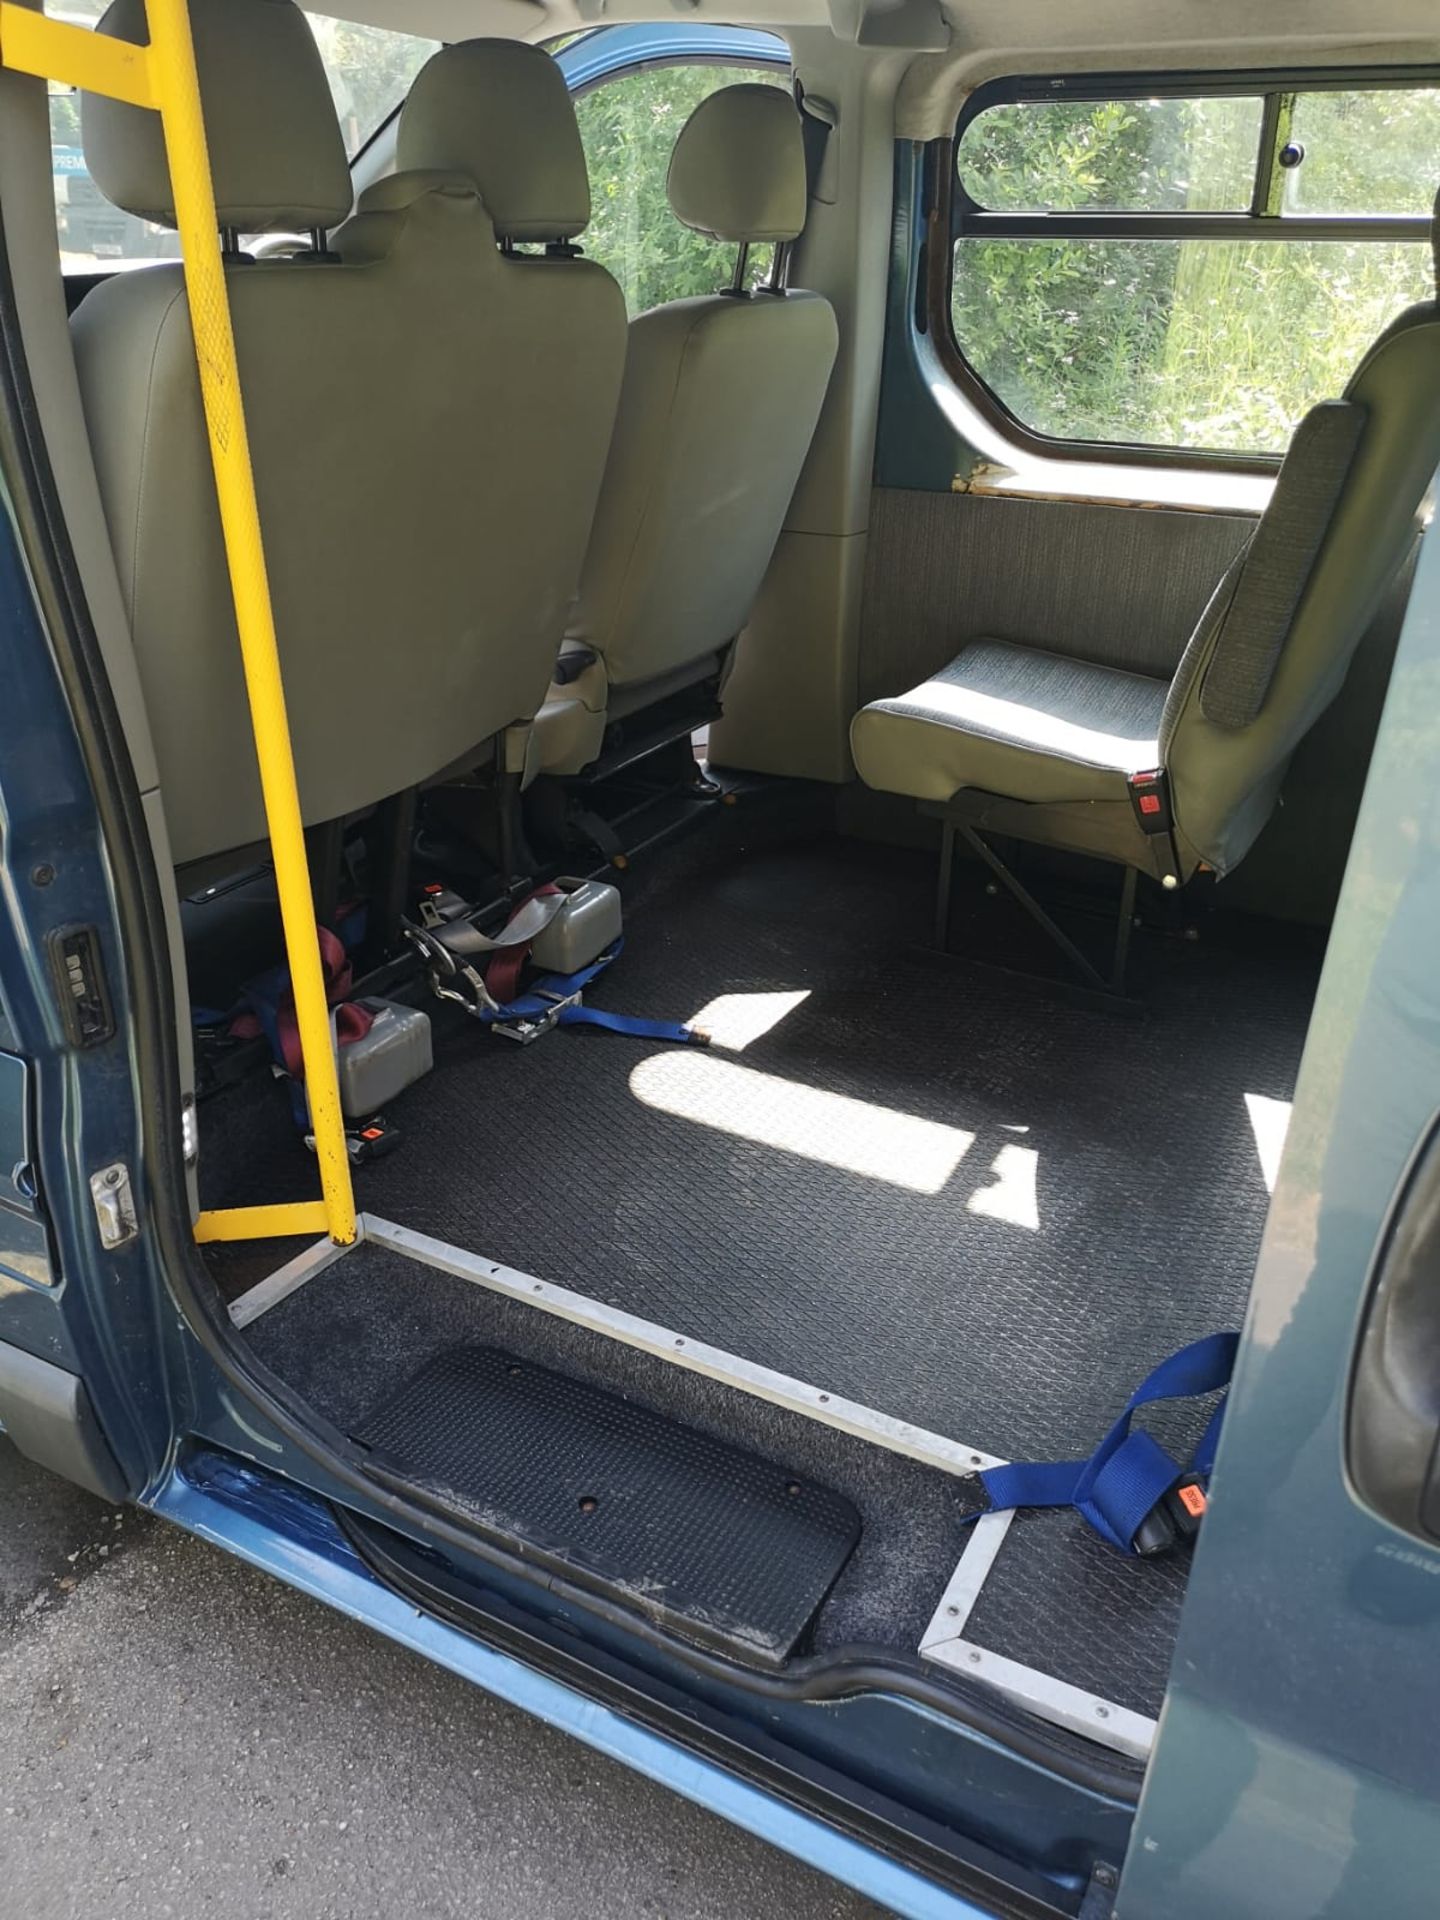 2007/56 REG RENAULT TRAFIC LL29+ DCI 115 2.0 DIESEL DISABLED ACCESS VAN, SHOWING 2 FORMER KEEPERS - Image 13 of 19